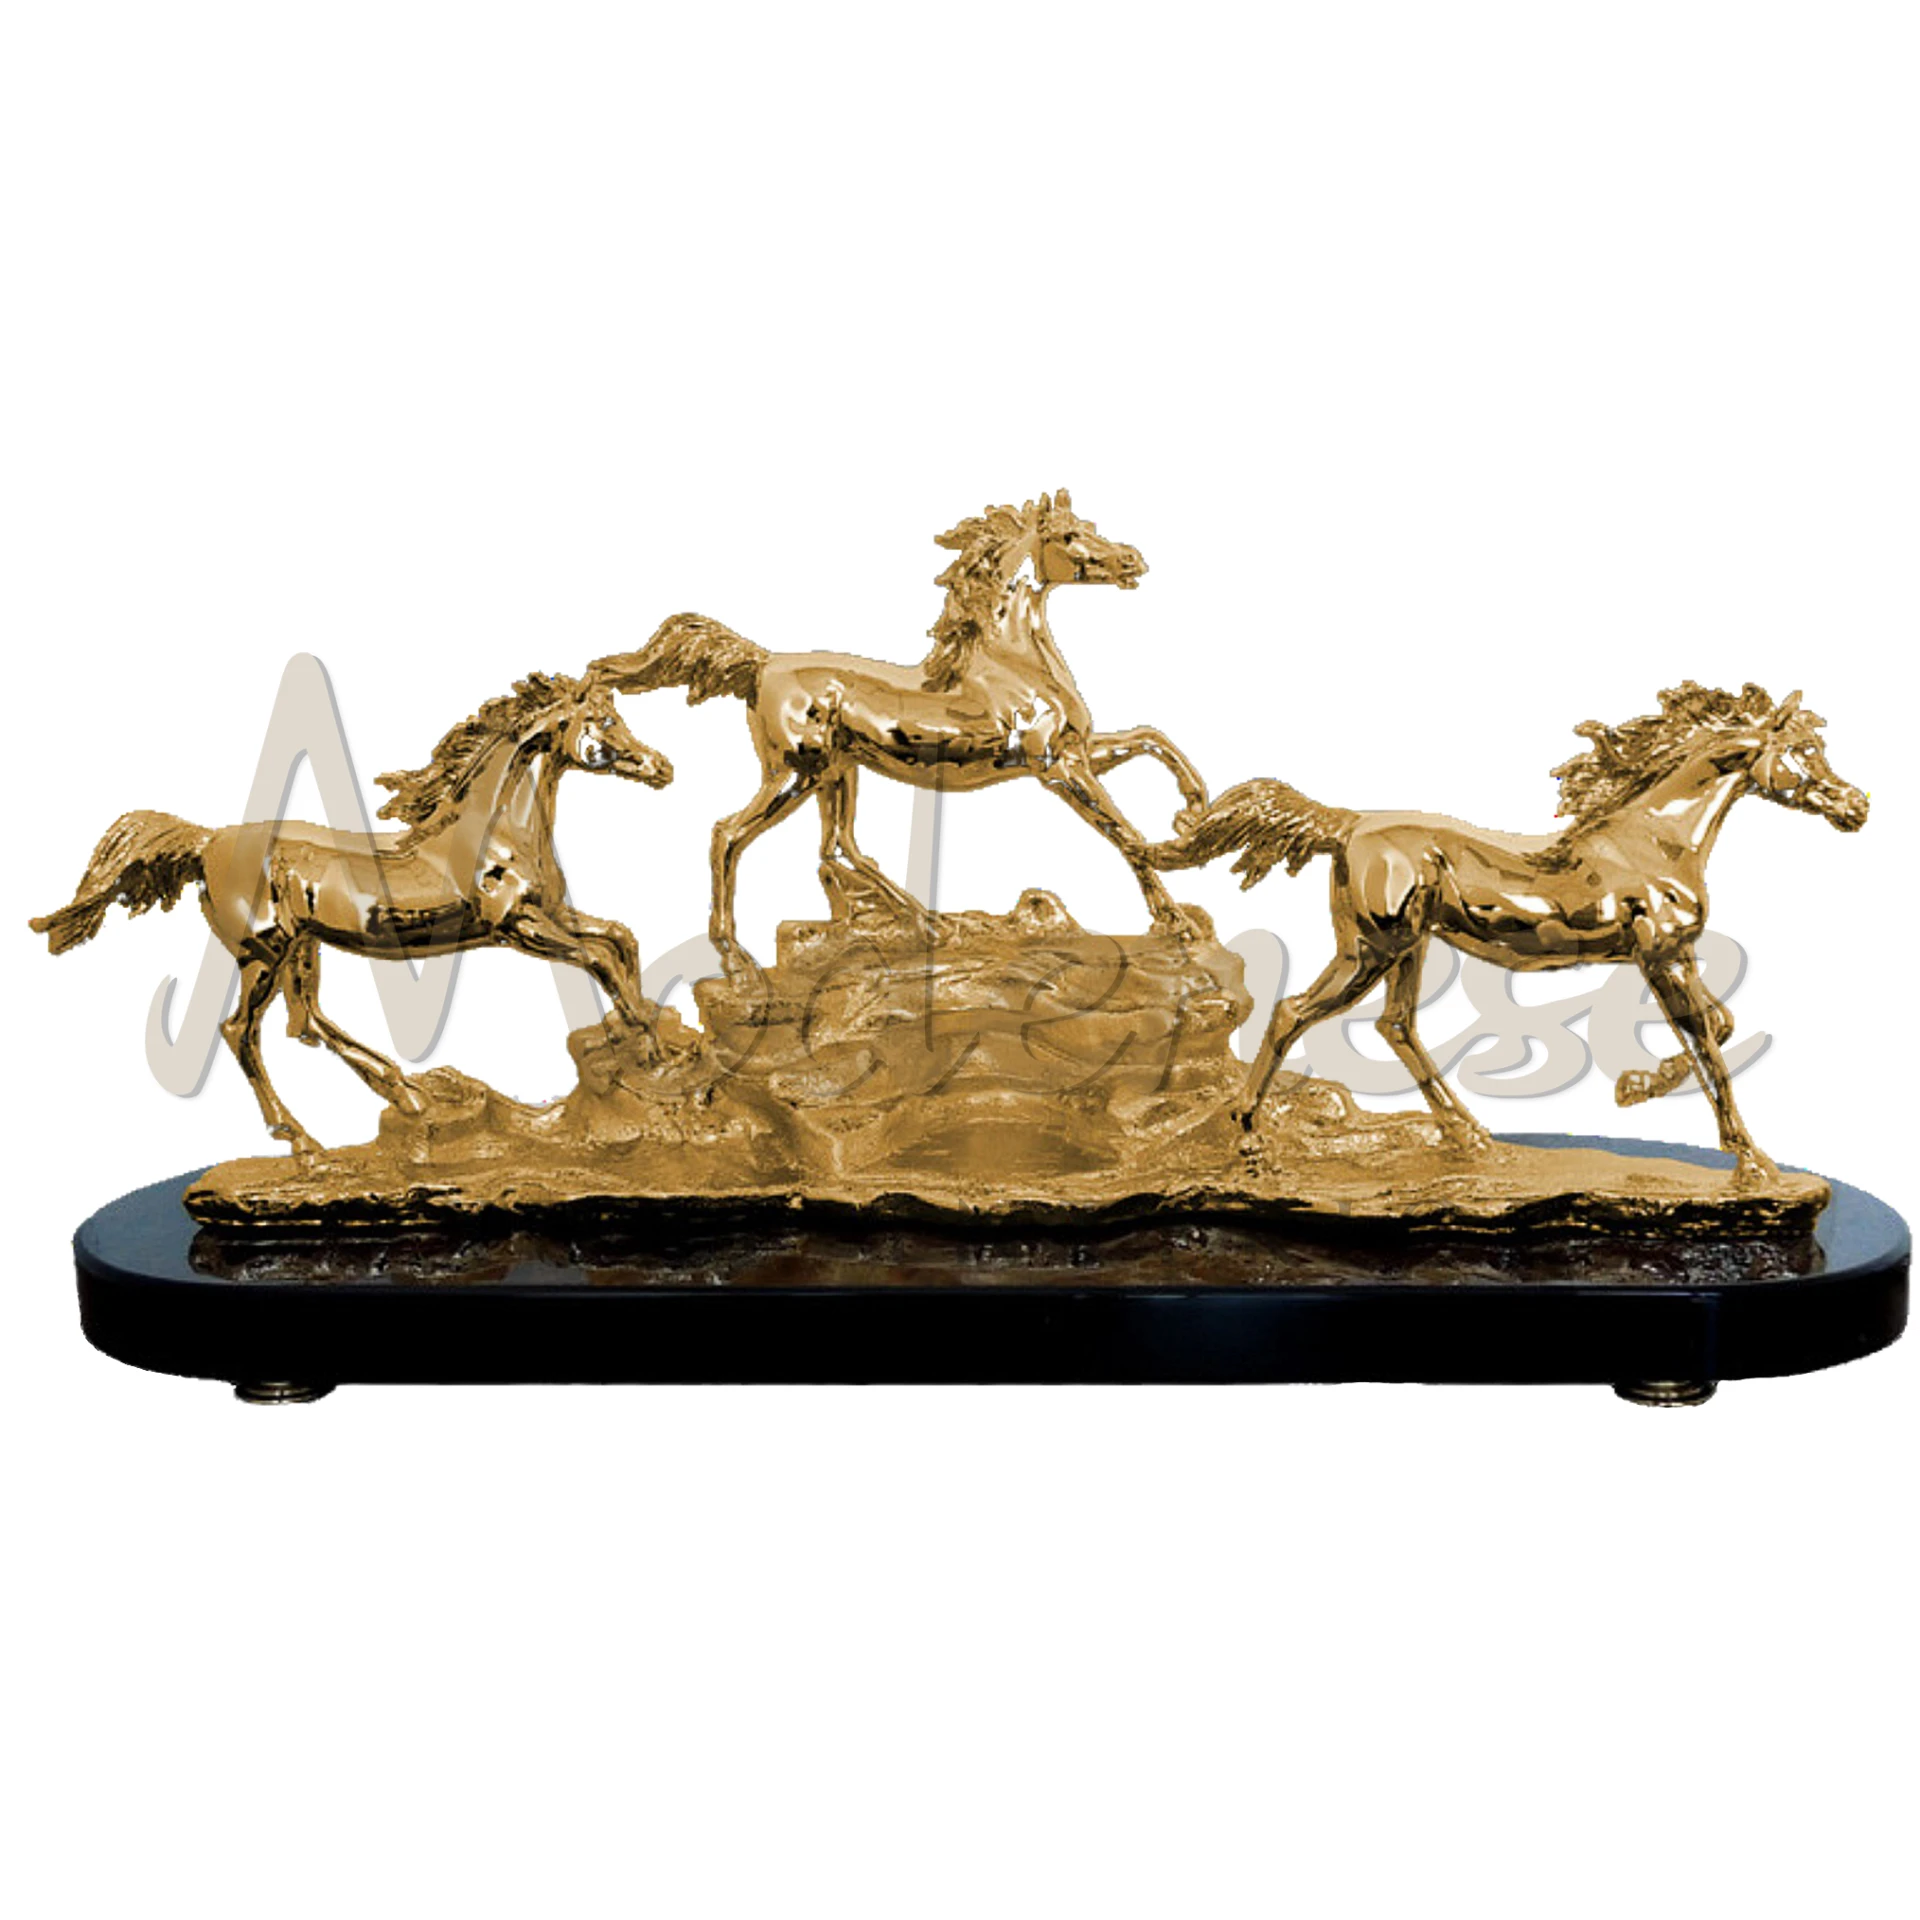 Luxury Gold Horse Set with realistic and abstract designs, offering elegance and artistic flair for premium interior design and home décor enhancement.